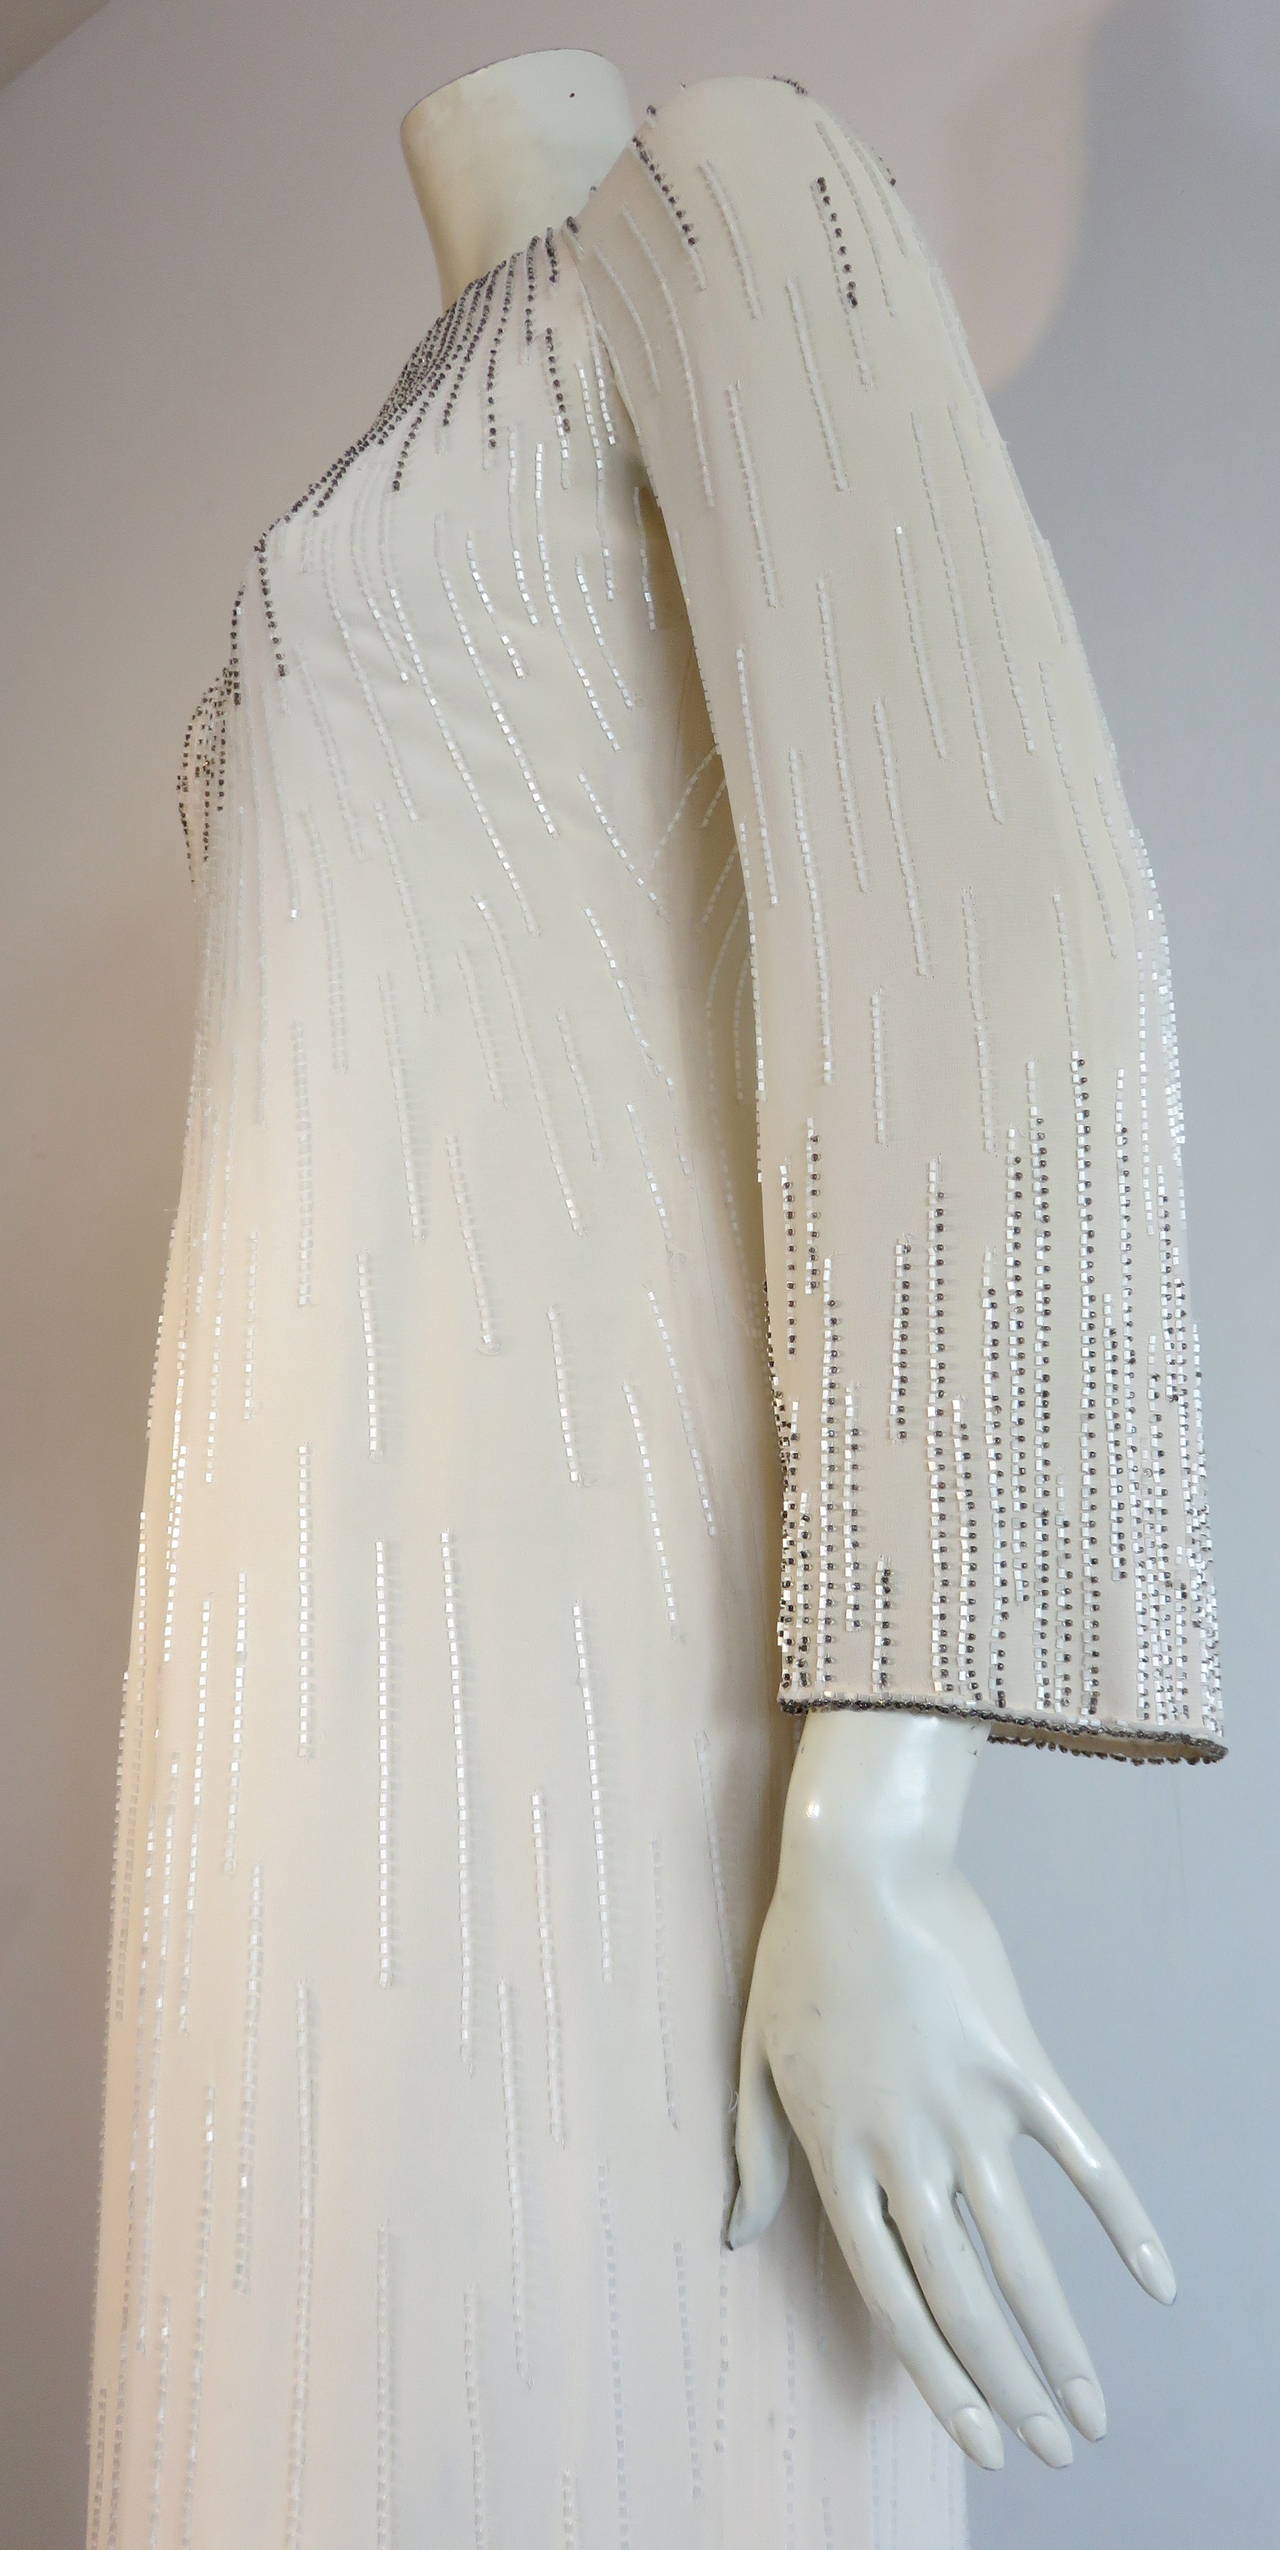 Women's 1970's GUY LAROCHE Haute Couture beaded evening gown dress For Sale